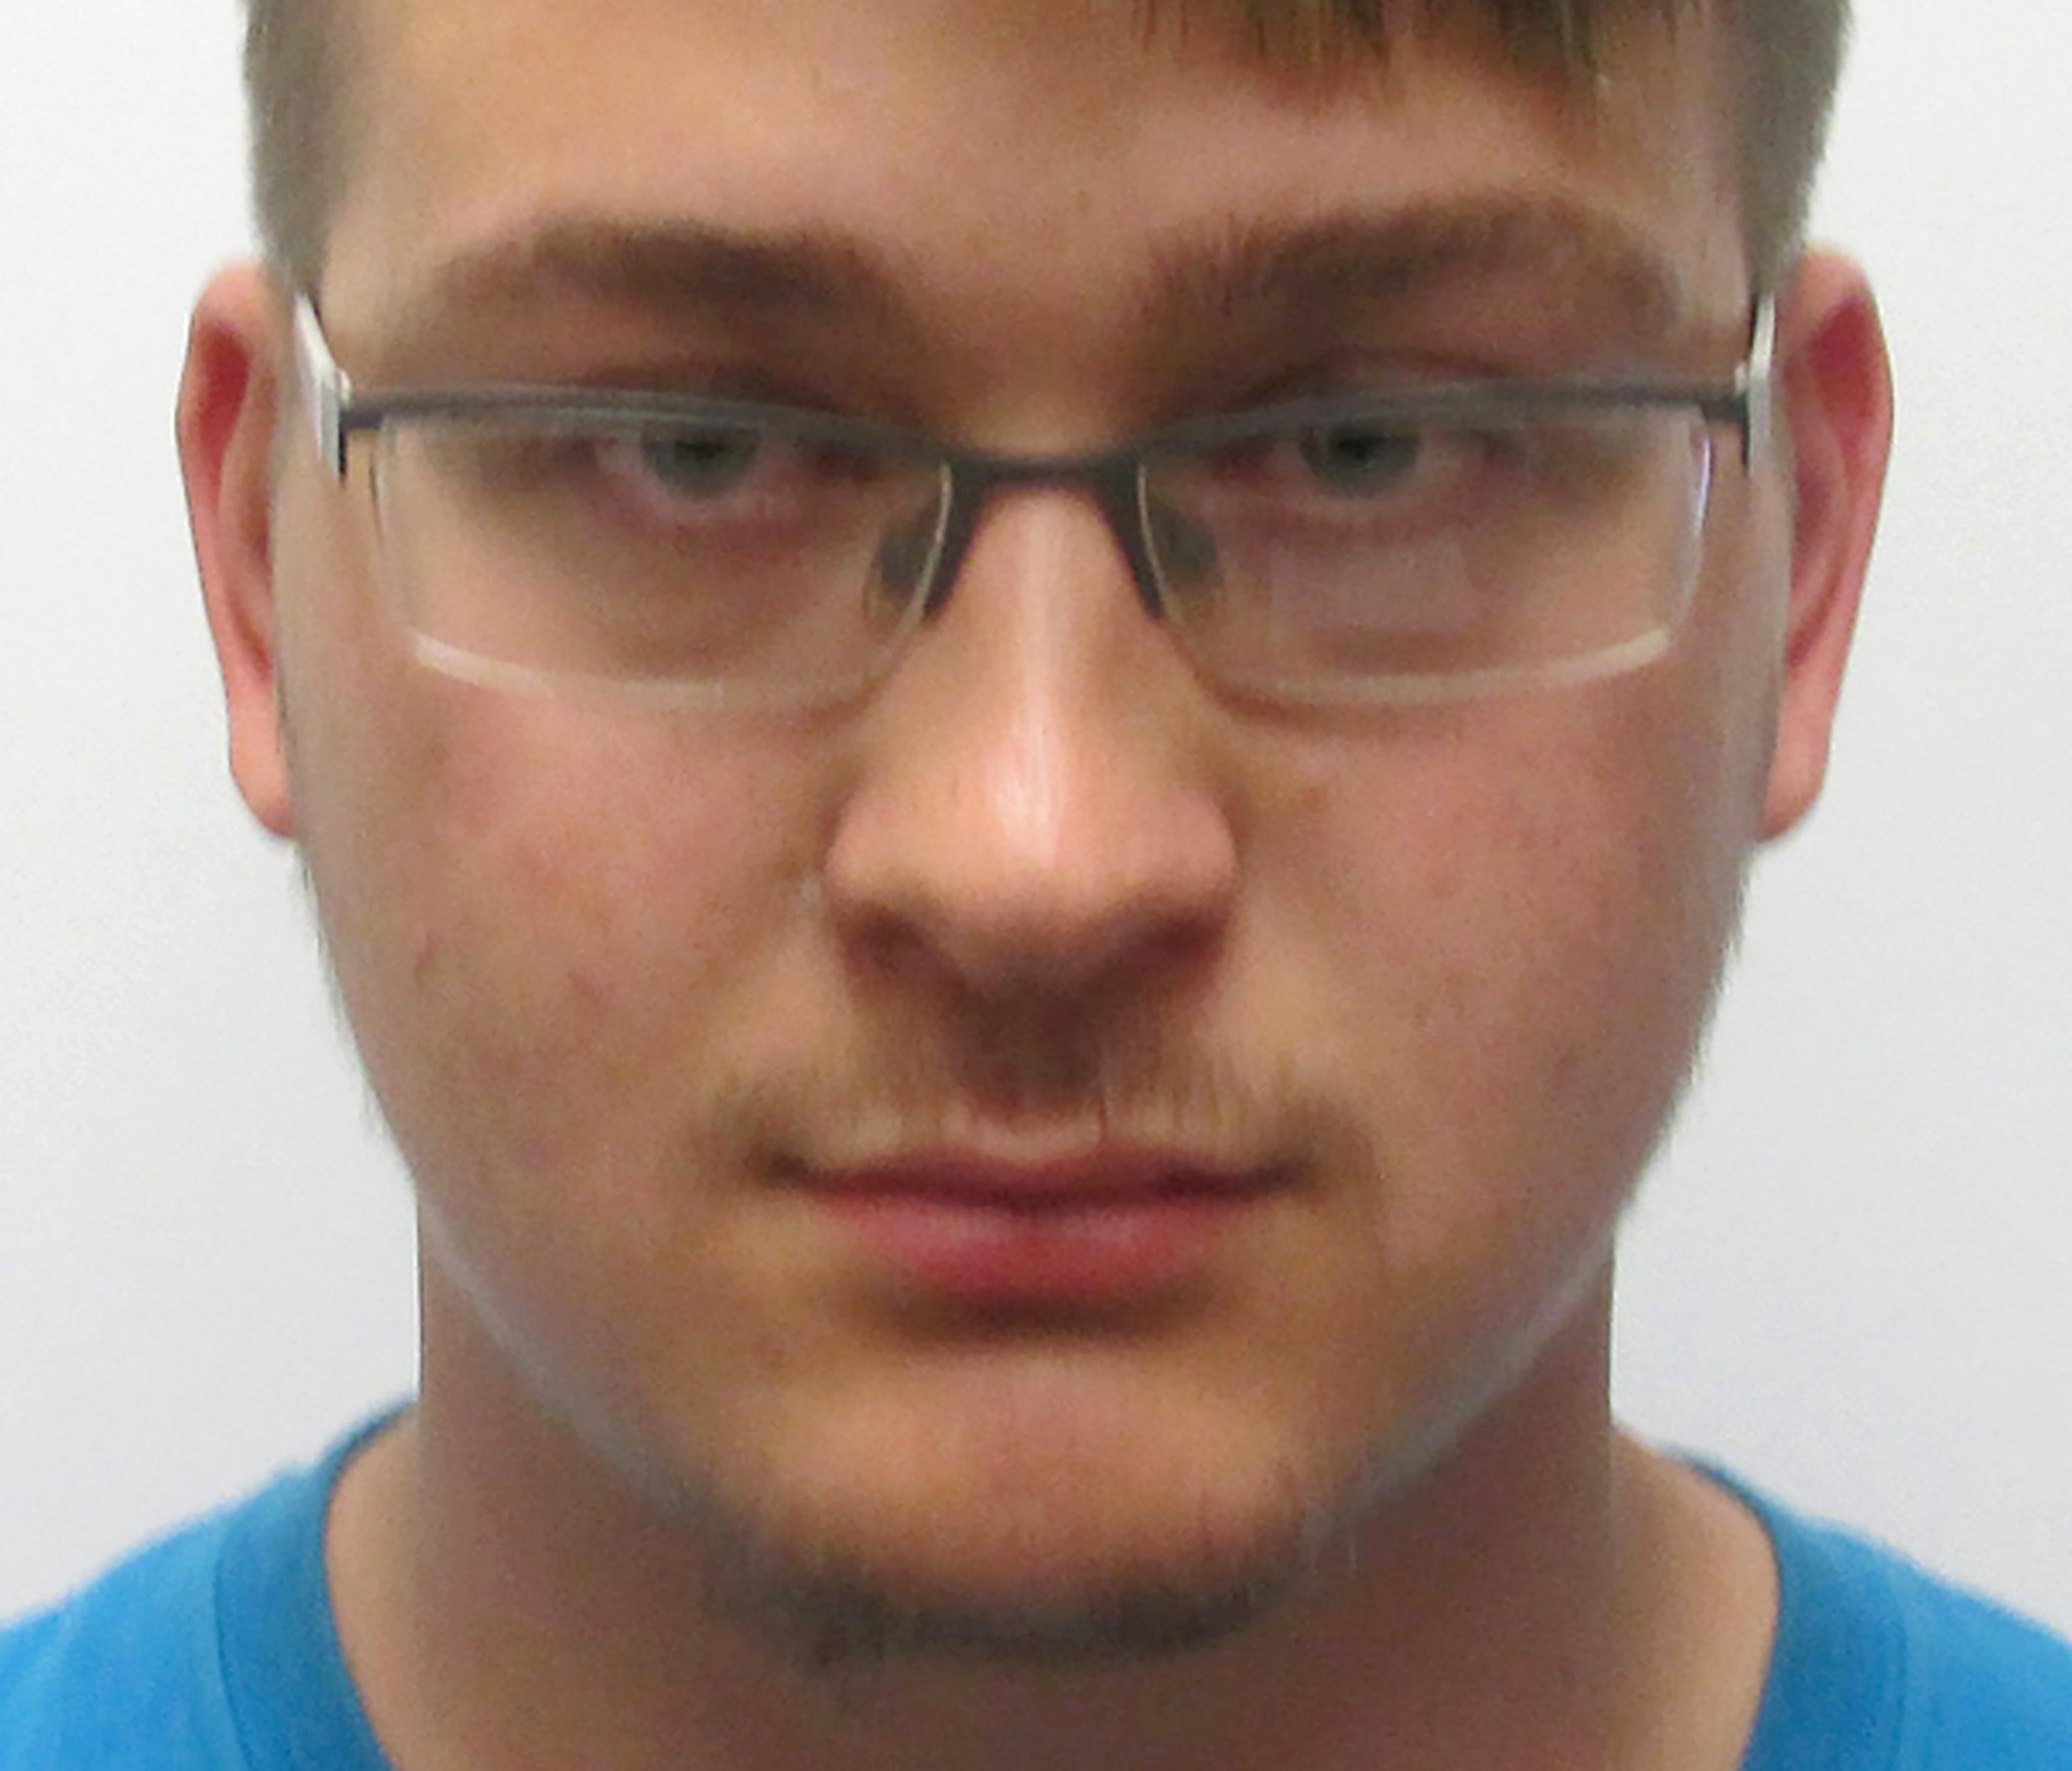 Michael Begin Jr., 18, of Jeffersonville, Ind., was jailed Jan. 29, 2018, on charges of molesting 17 children ages 3 to 7 while he worked at a YMCA and as an elementary school teaching assistant. He previously had been arrested on similar charges in 